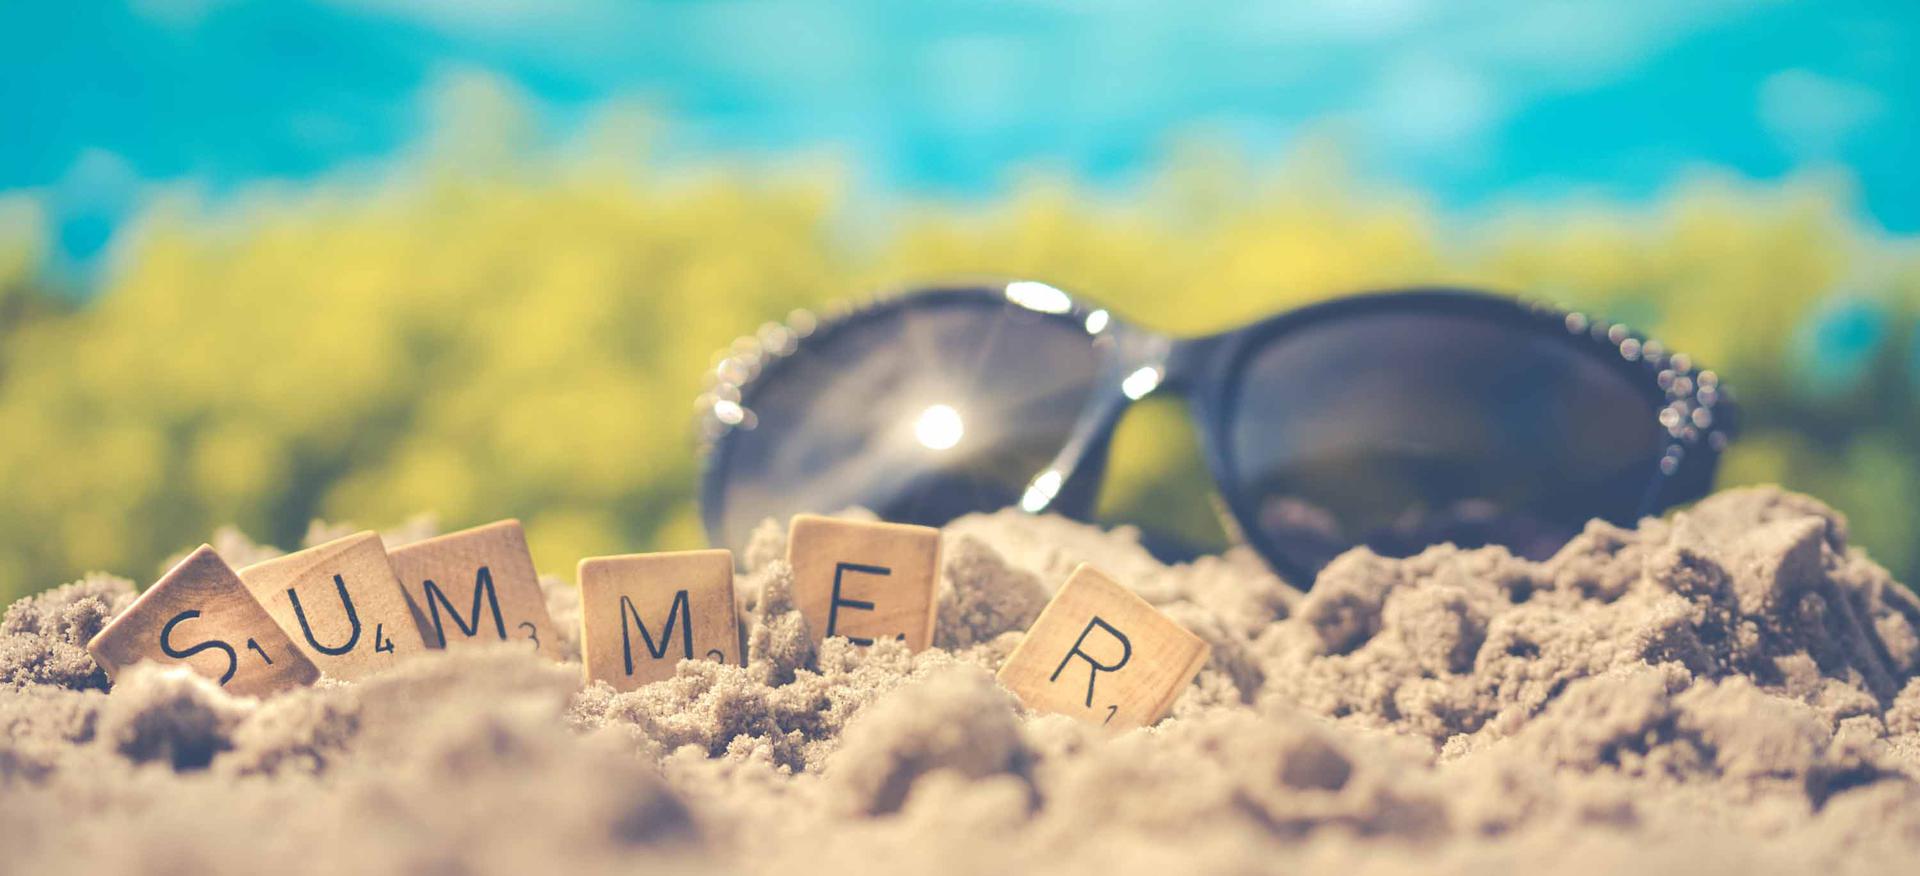 6 Useful Tips For A Safe and Worry-Free Summer